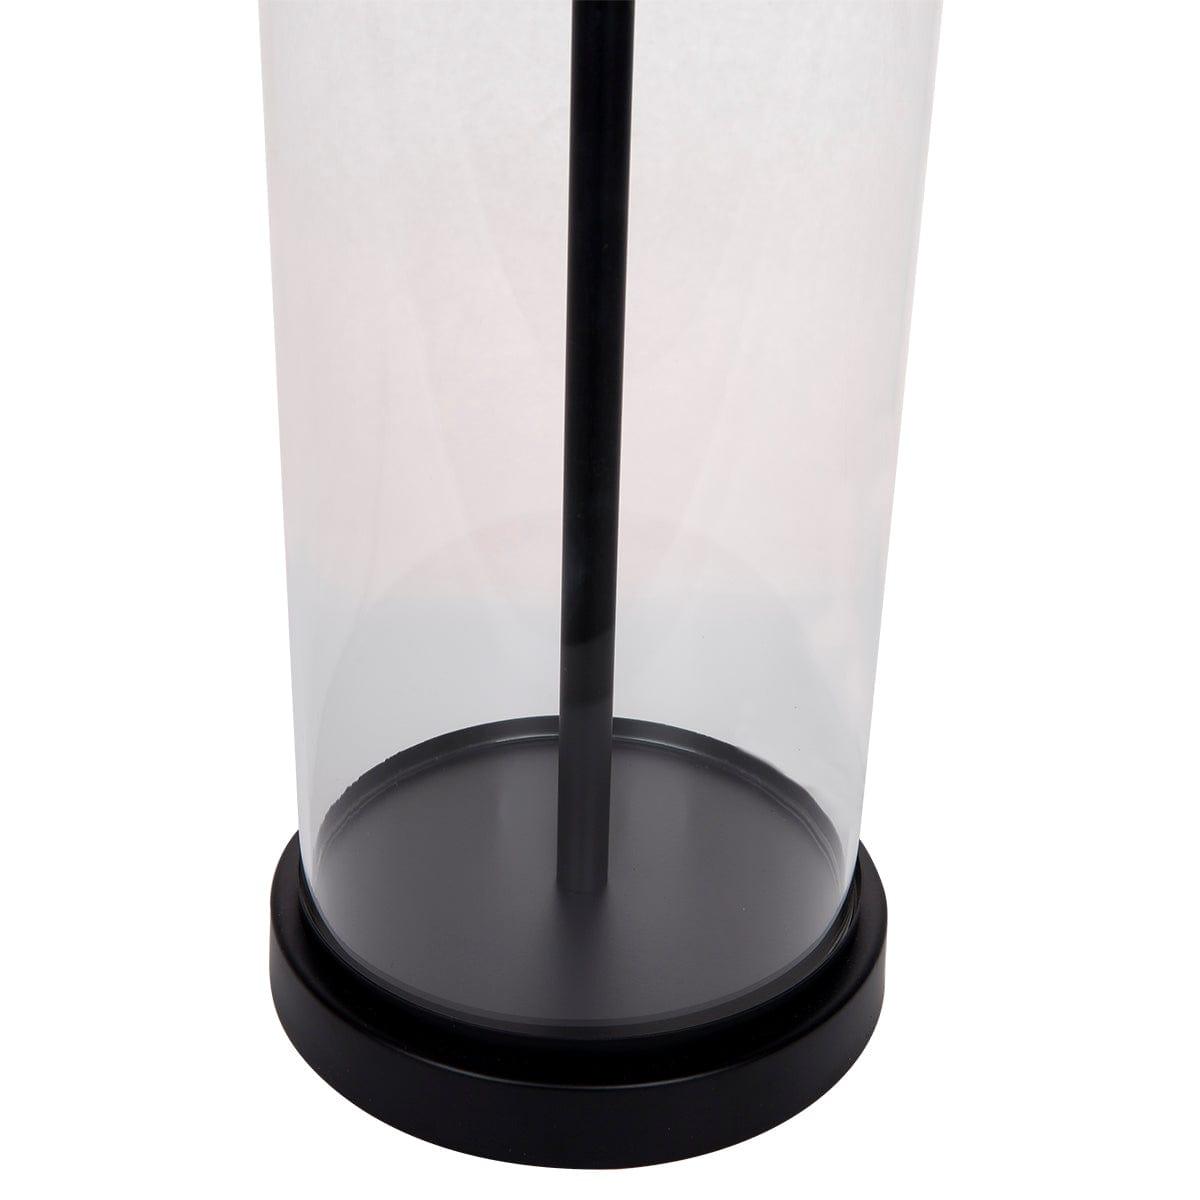 House Journey Table Lamp Left Bank Table Lamp - Black w Black Shade